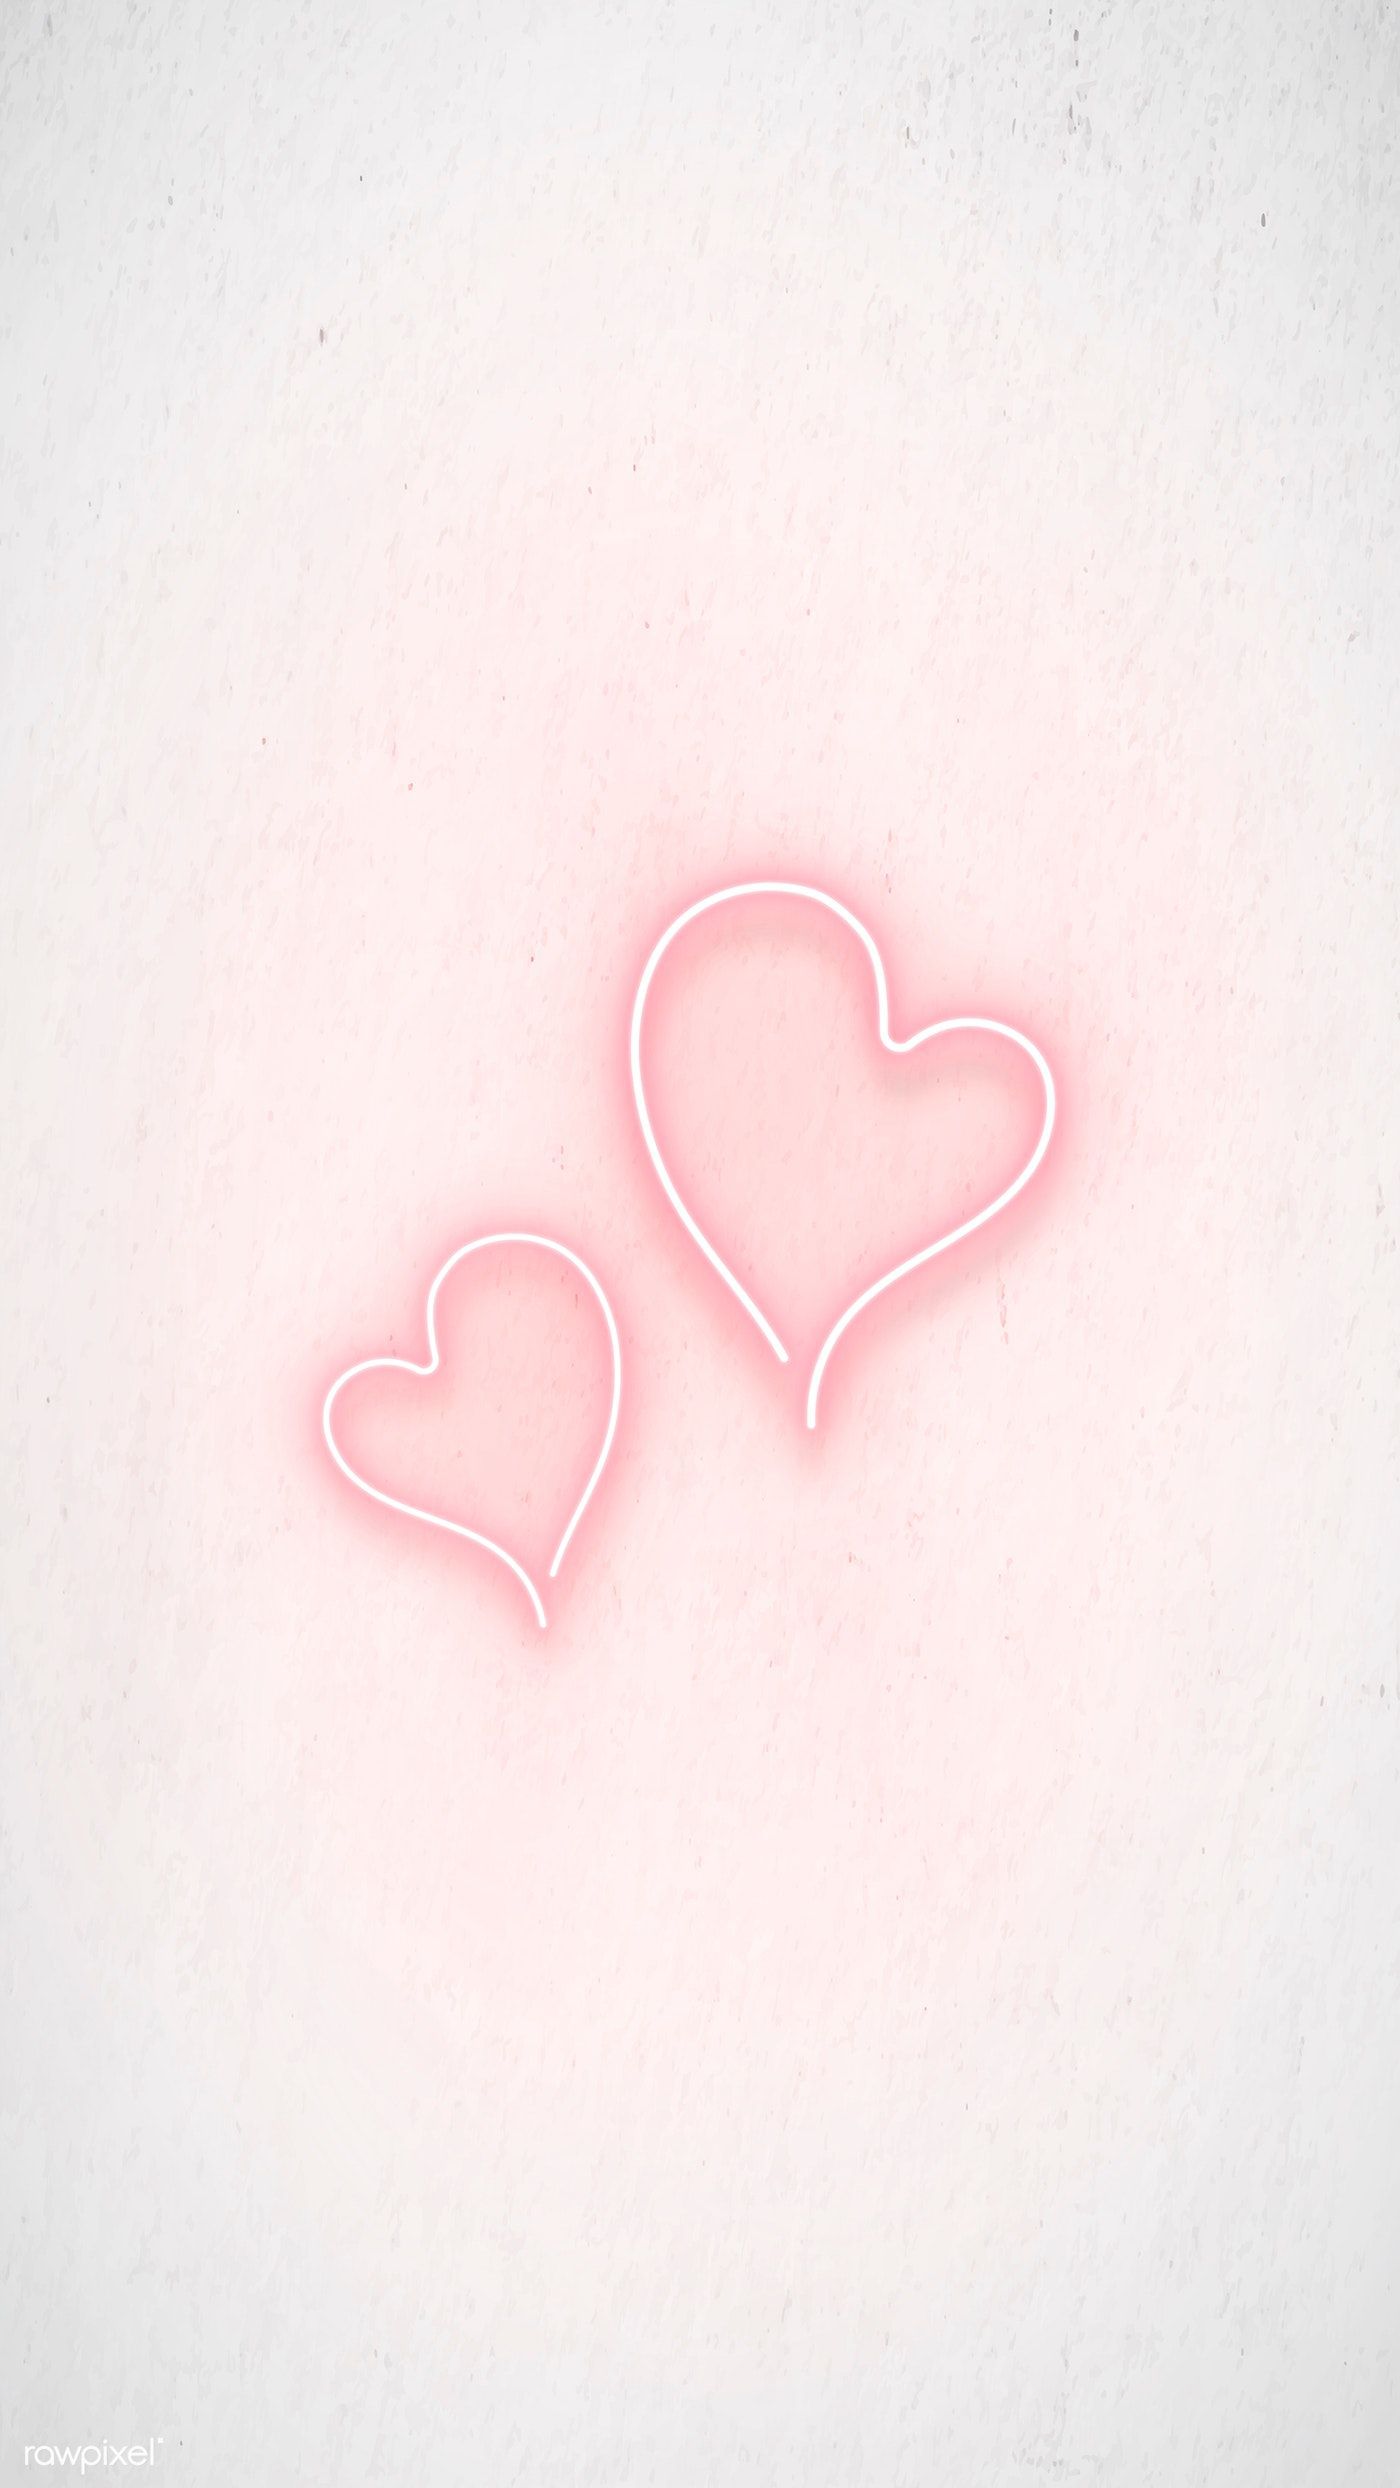 20 Choices pink heart wallpaper aesthetic laptop You Can Download It ...